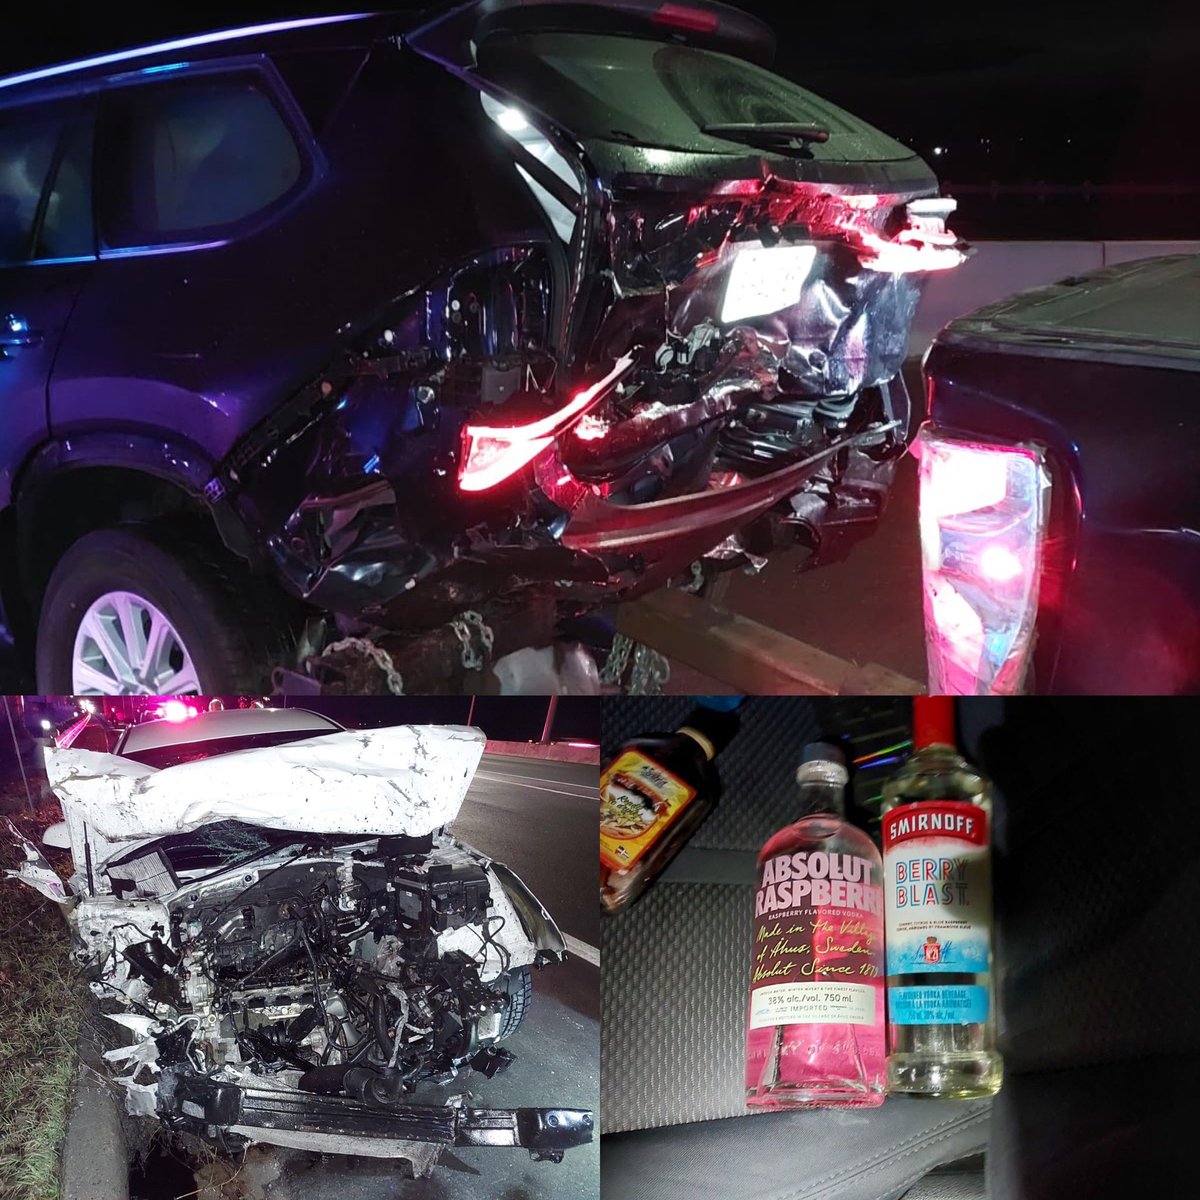 Saturday morning AuroraOPP investigated a collision at Hwy404 SB/Stouffville Rd. 28 yr old male from Kitchener with minor injuries, arrested & charged DangerousDriving, ImpairedDriving, ObstructPeaceOfficer
DontDrinkAndDrive…